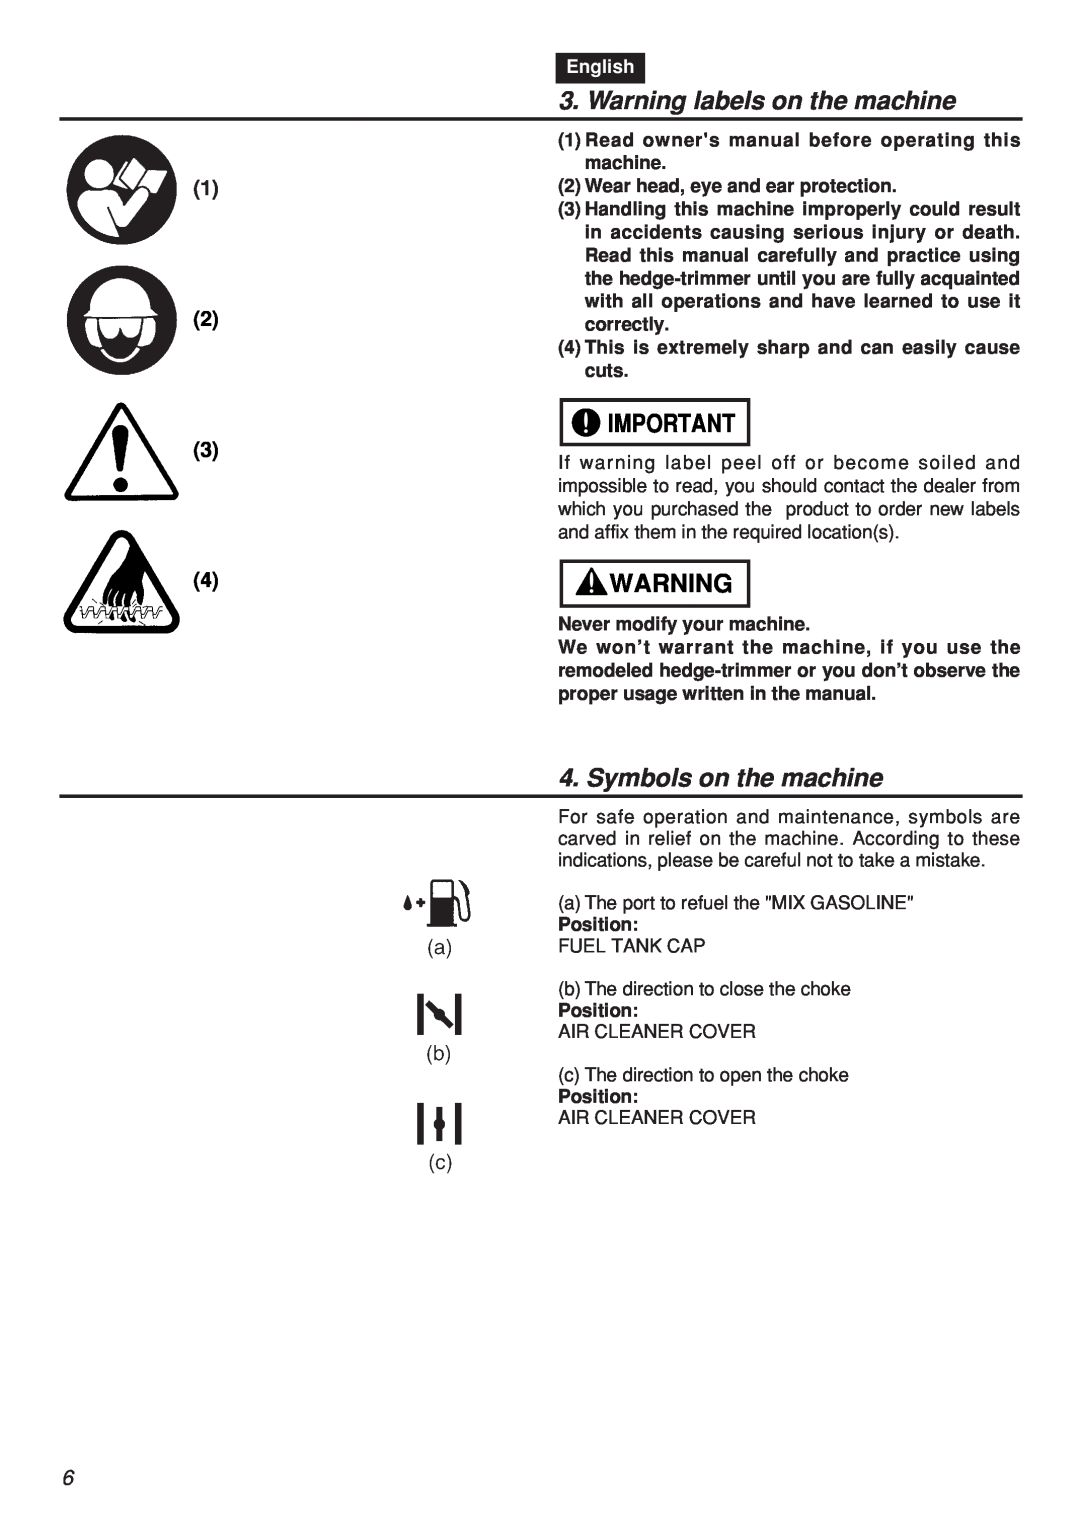 Zenoah HTZ2401L-CA Warning labels on the machine, Symbols on the machine, English, a The port to refuel the MIX GASOLINE 